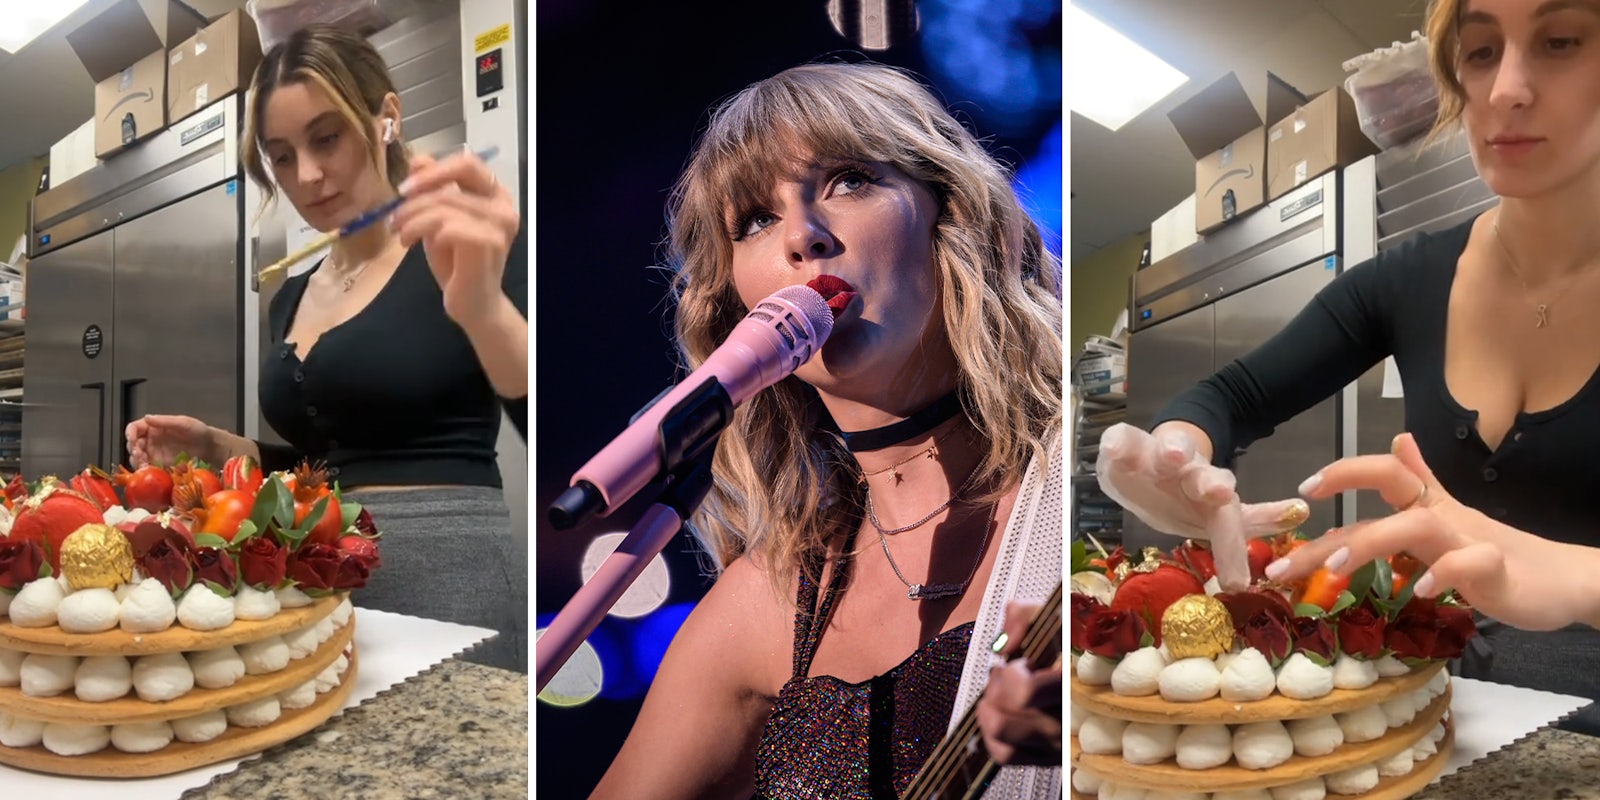 Baker says she was asked to make a cake under extreme time constraints. She found out later it was for Taylor Swift